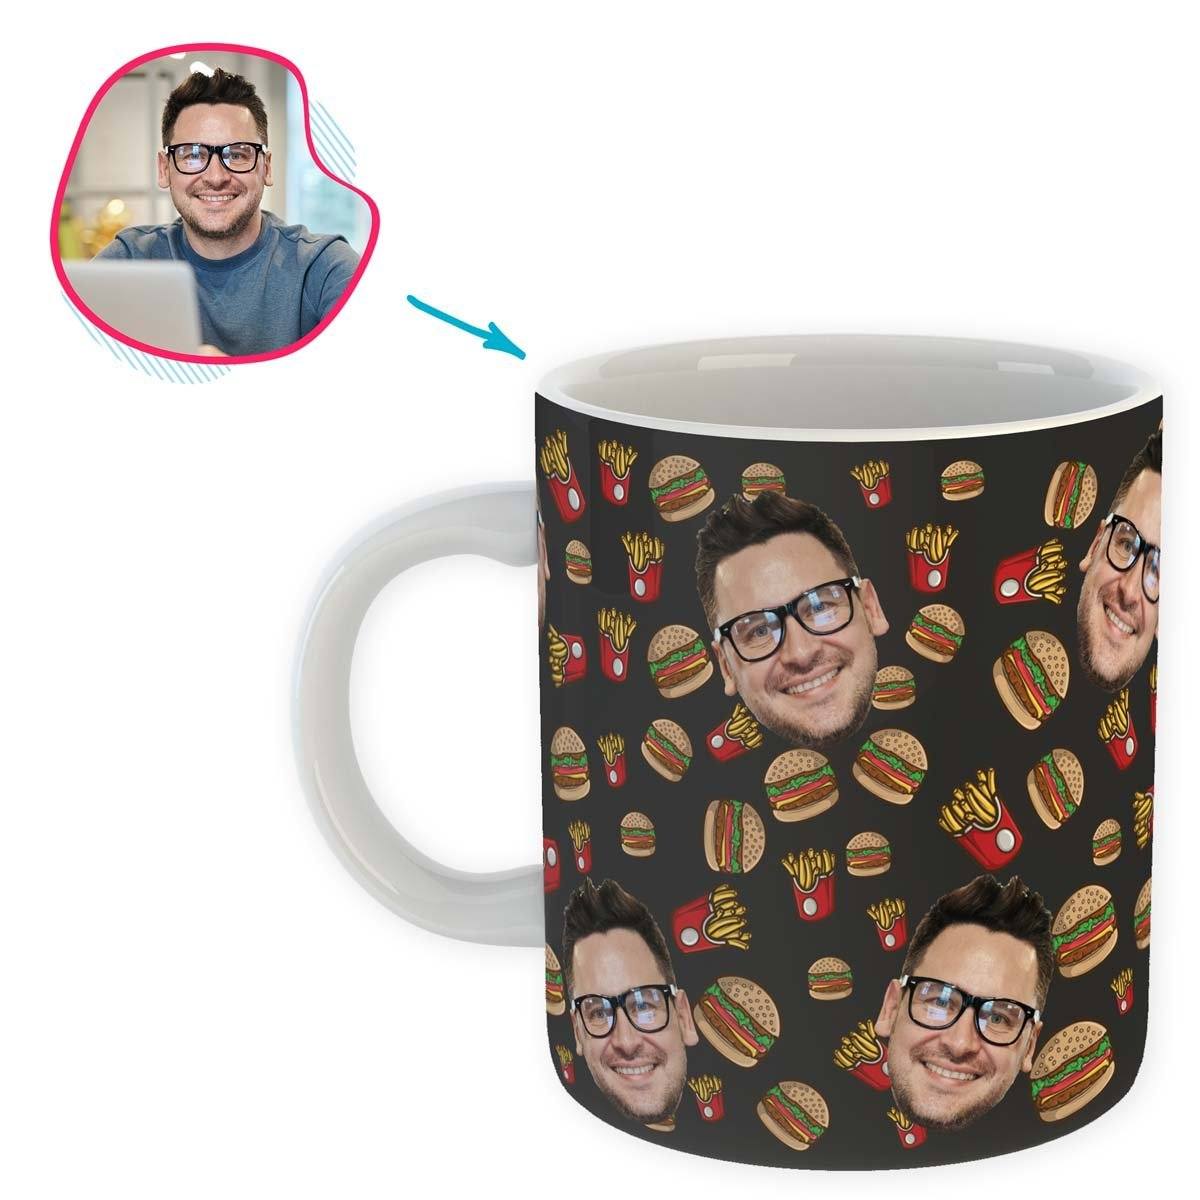 dark Fastfood mug personalized with photo of face printed on it